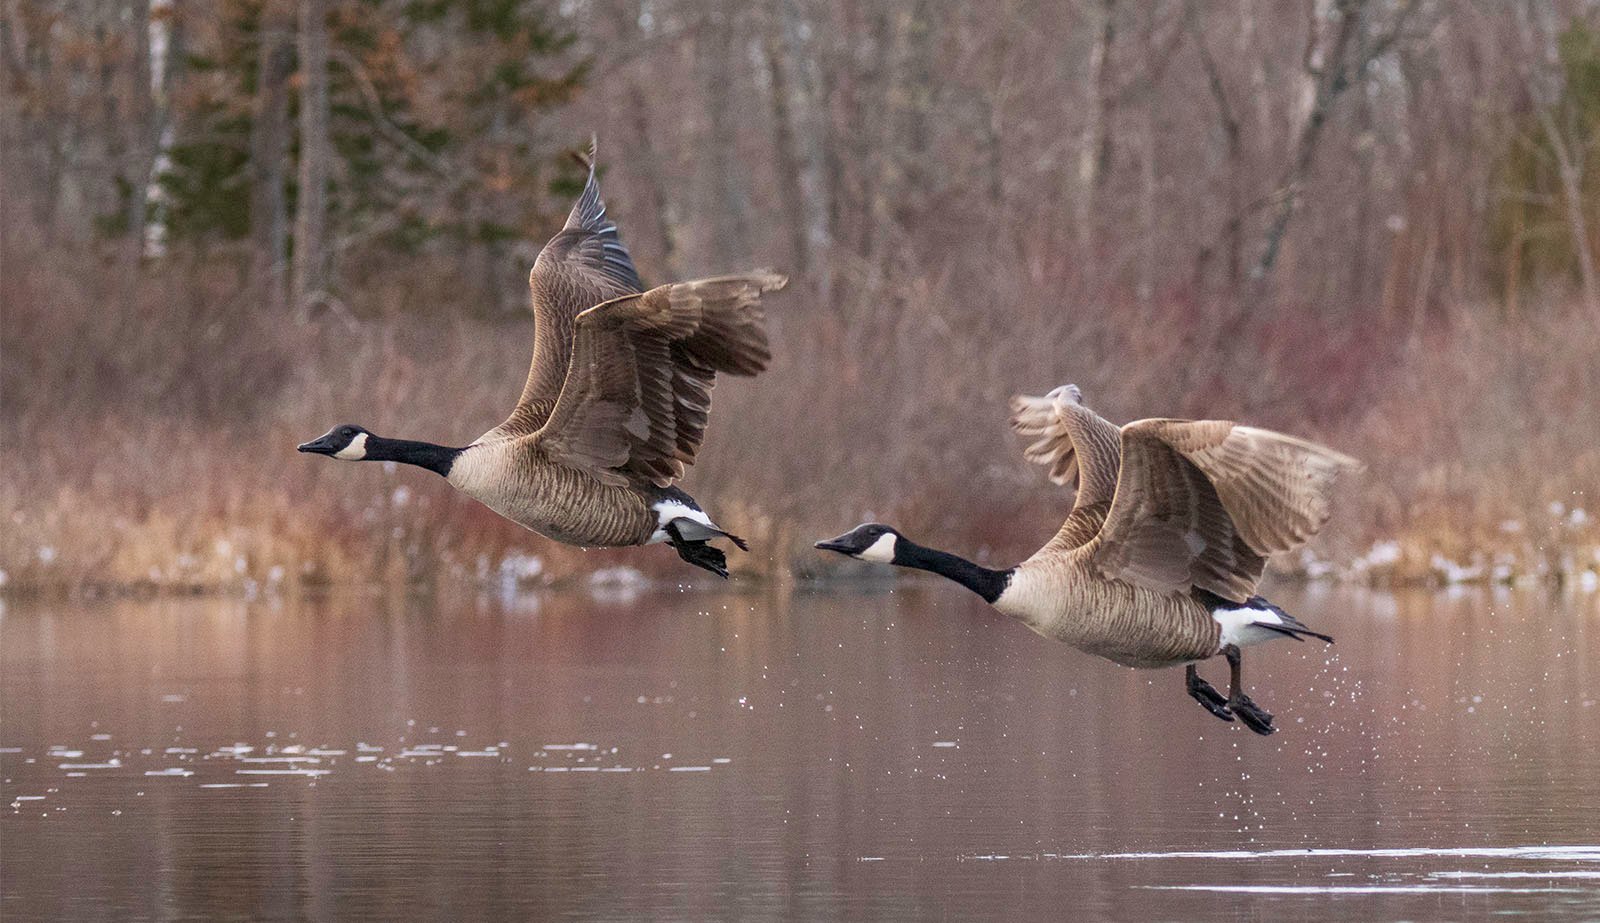 Two canada geese in flight above a lake, with one goose slightly ahead of the other. both are in mid-flap with wings raised, against a backdrop of trees and reeds.